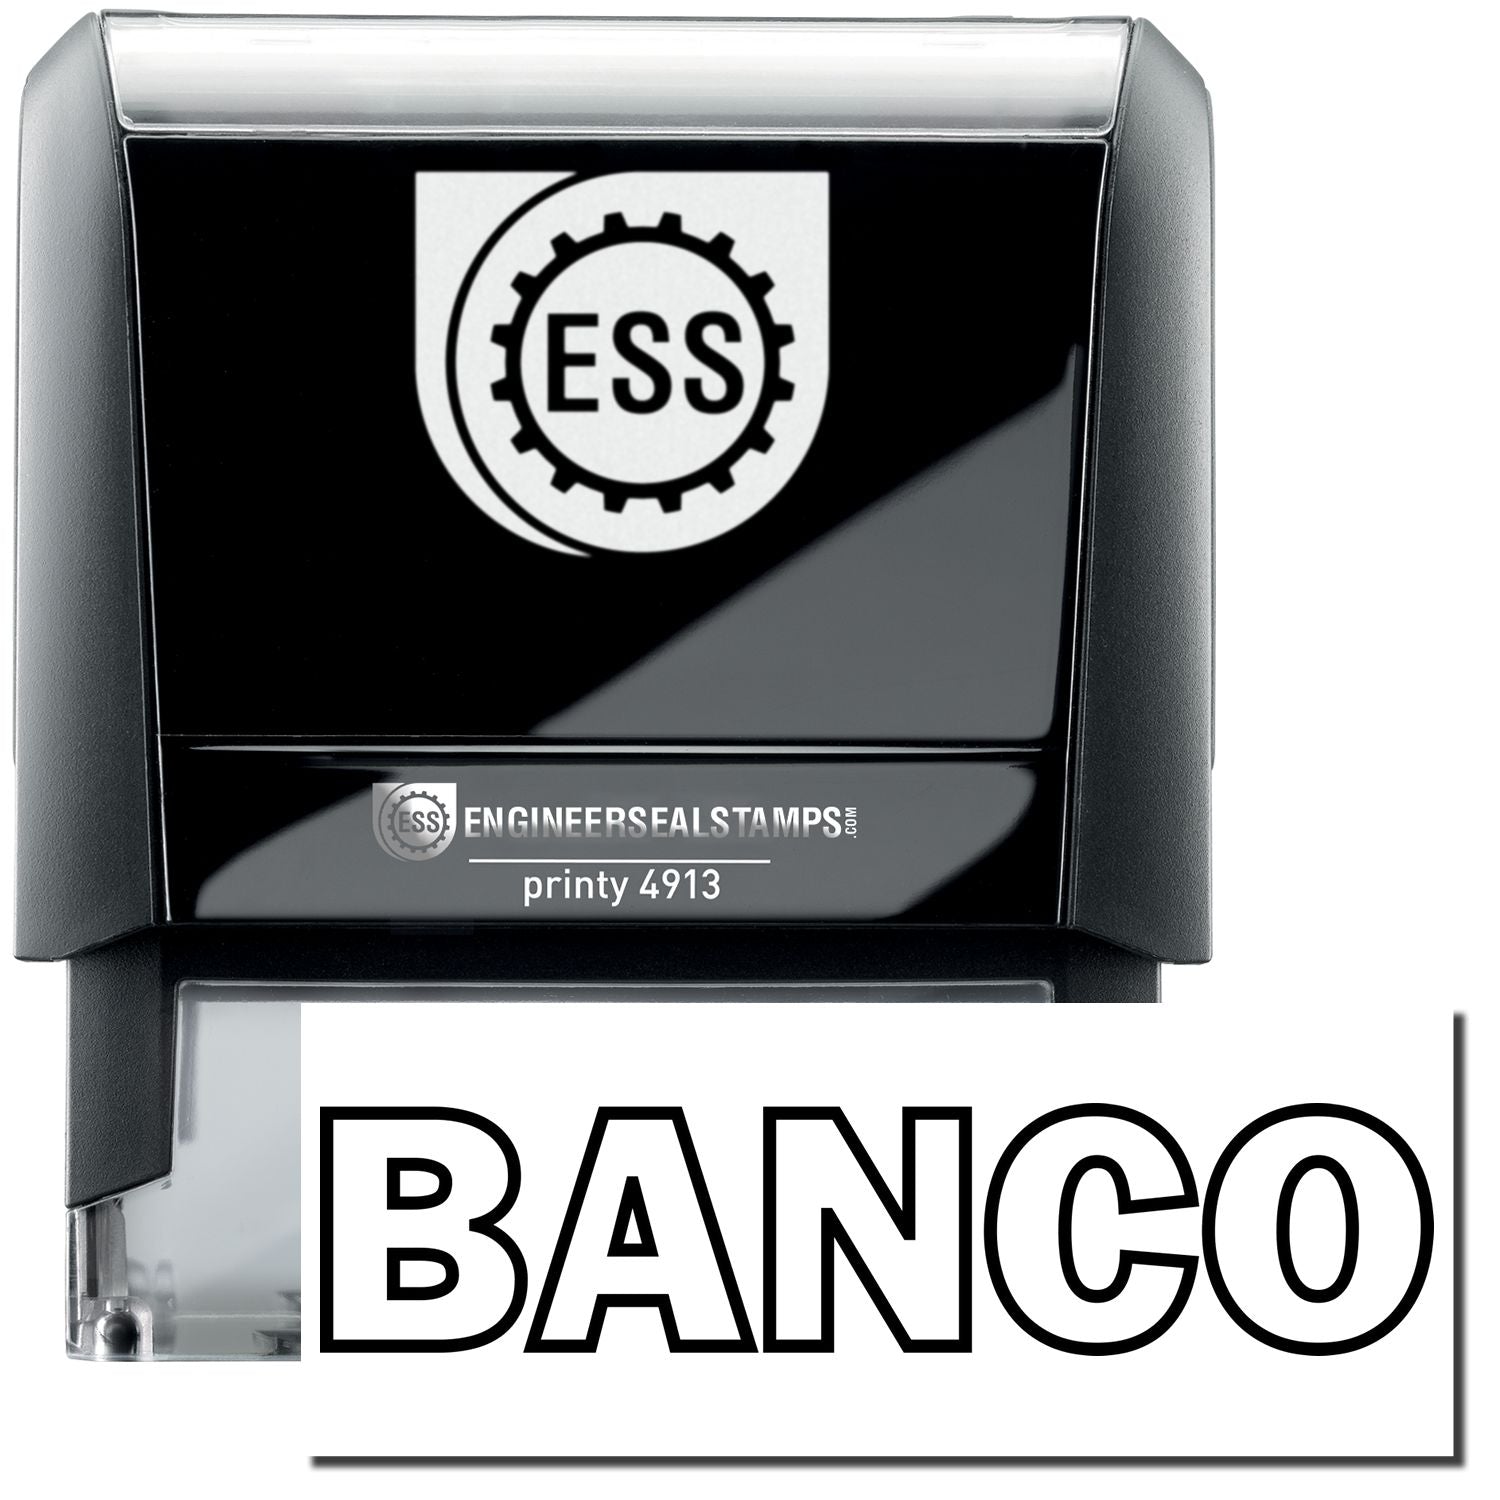 A self-inking stamp with a stamped image showing how the text "BANCO" in a large outline style is displayed by it after stamping.